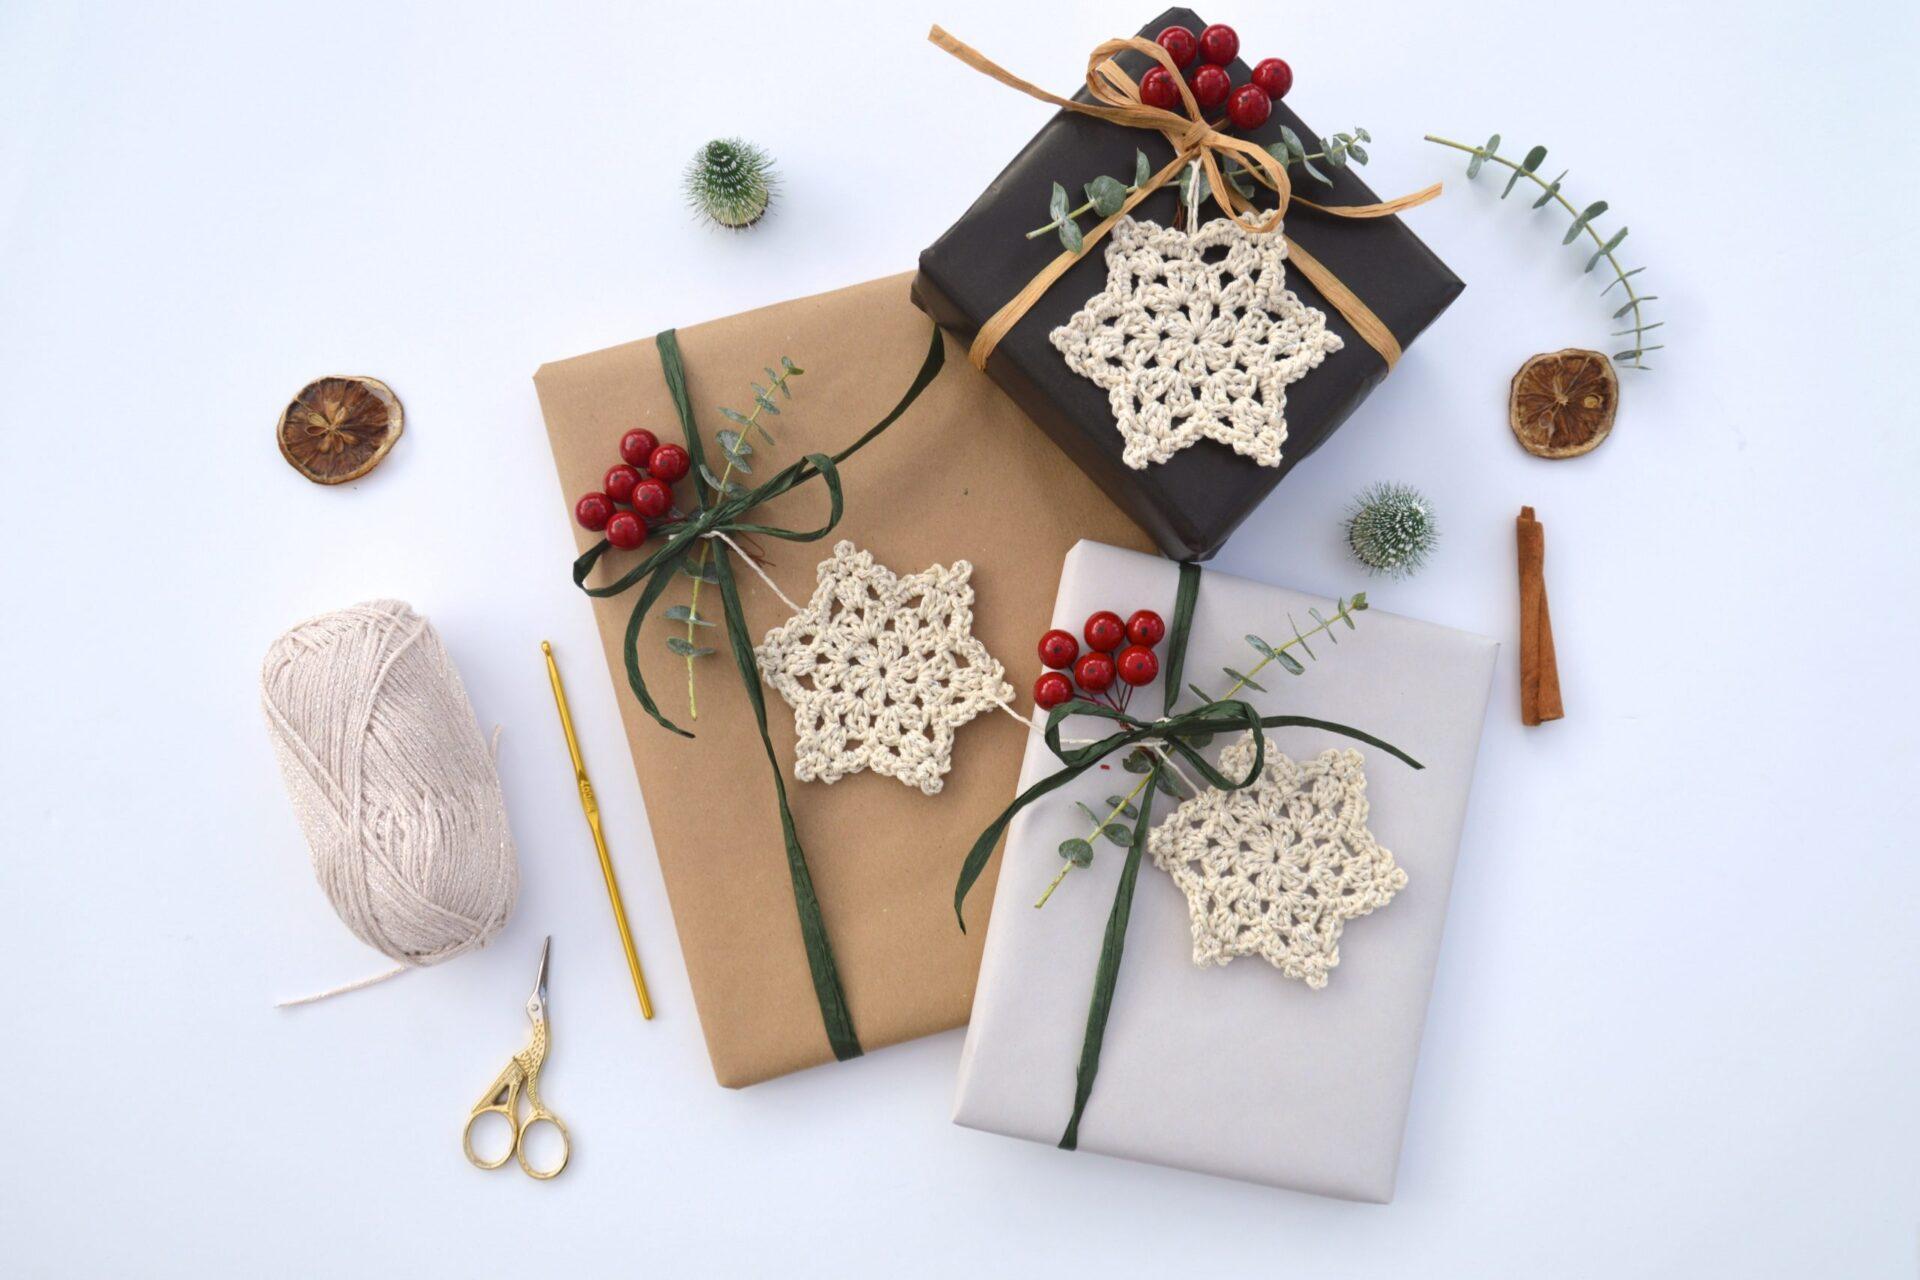 a flat lay image of three small gifts wrapped in neutral wrapping paper with a crochet snowflake in cream yarn attached to each of the presents along with foliage and berries.